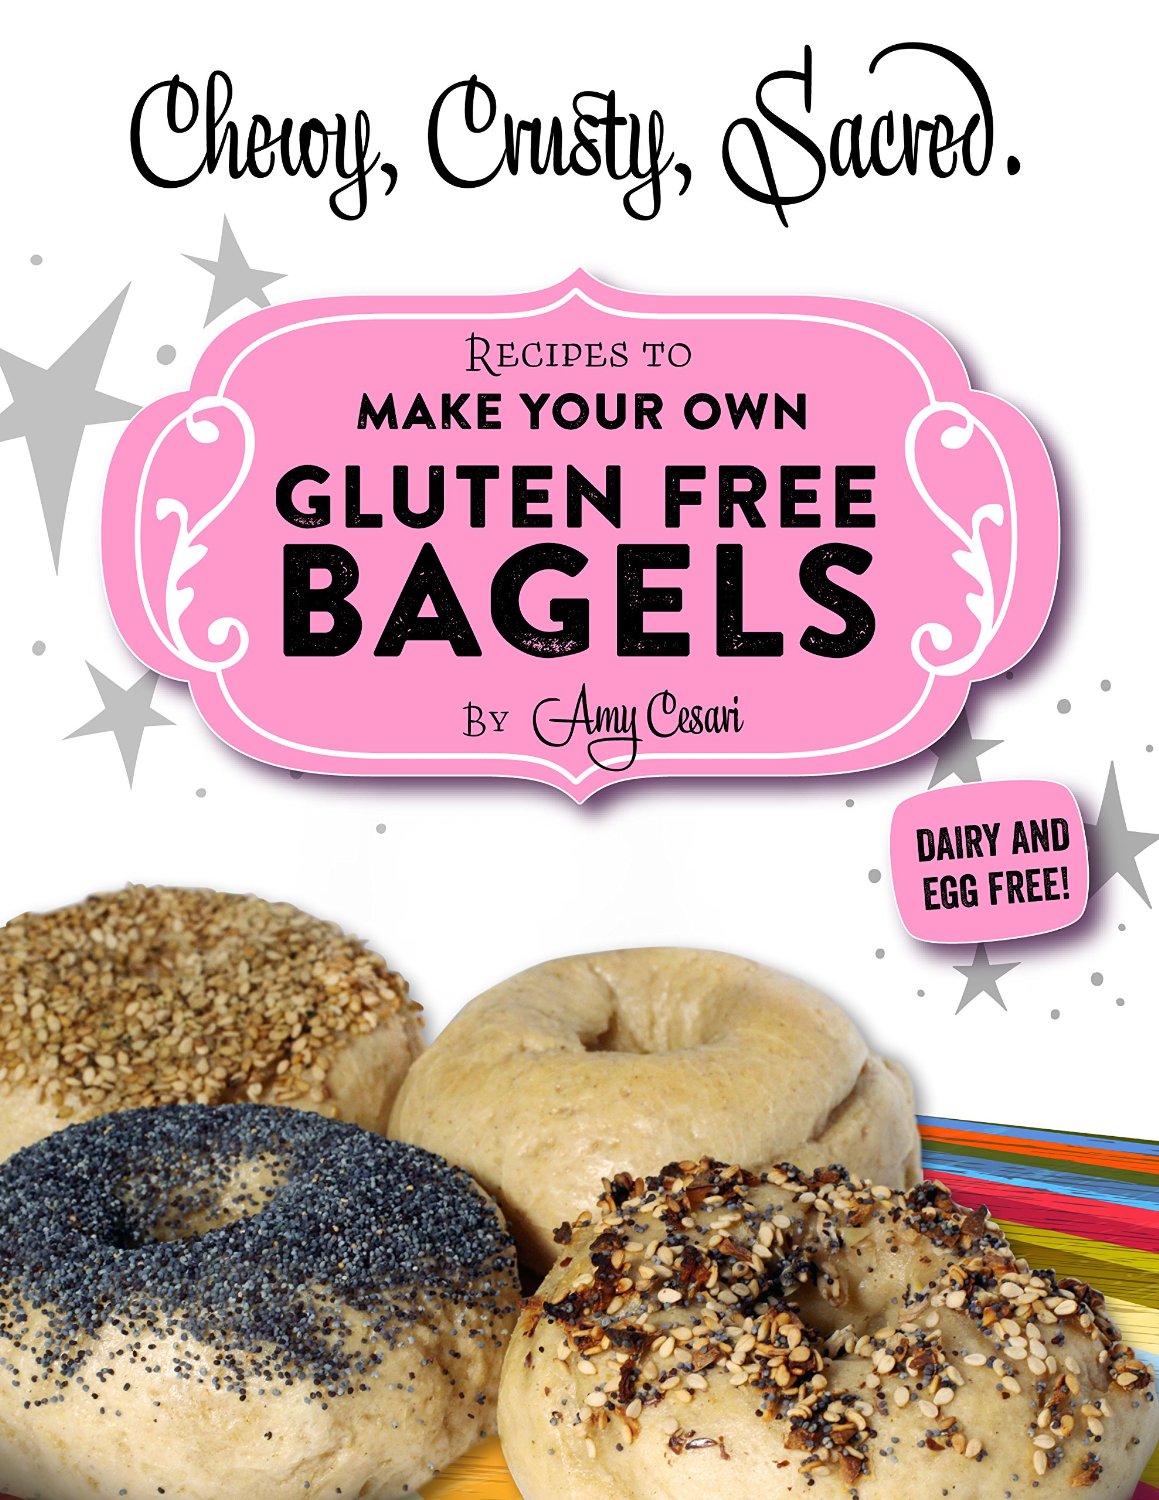 Chewy, Crusty, Sacred.: Recipes To Make Your Own Gluten Free Bagels